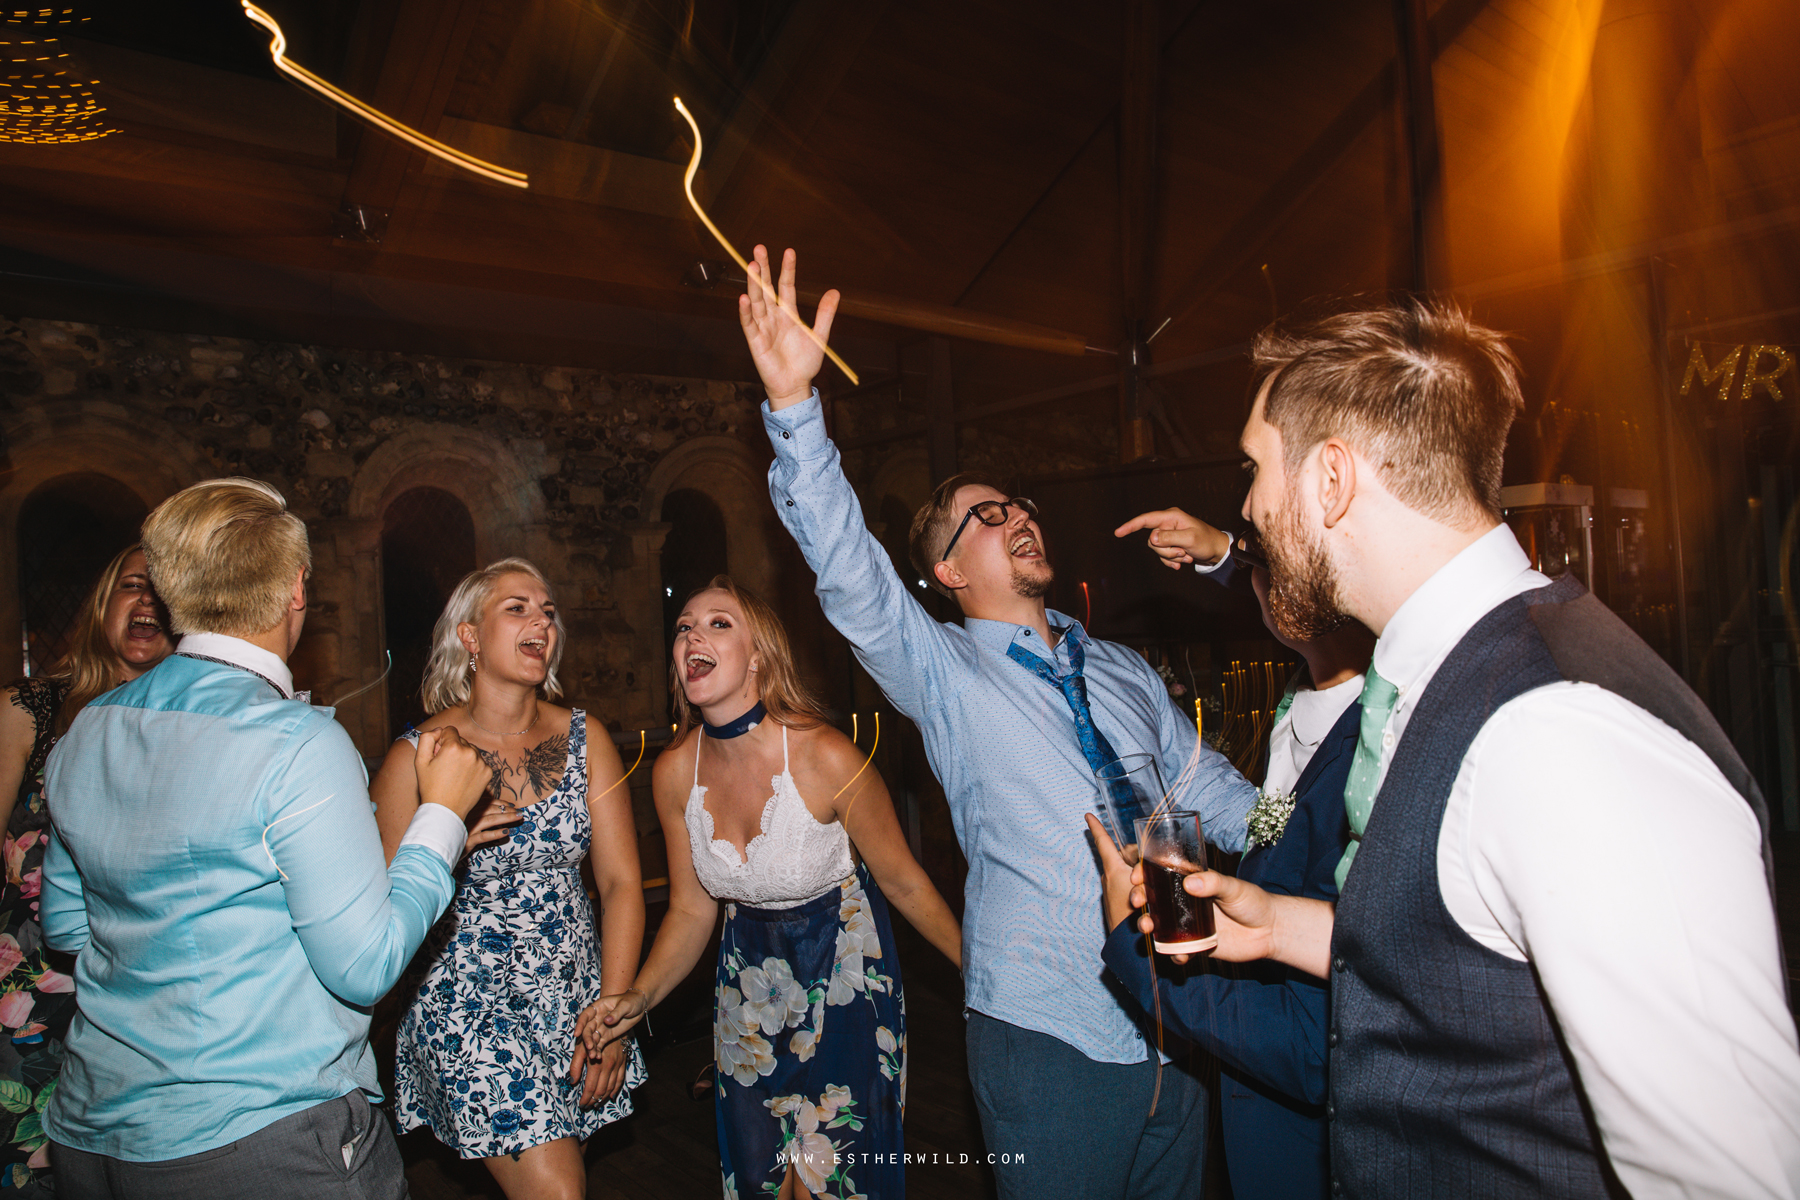 Norwich_Castle_Arcade_Grosvenor_Chip_Birdcage_Cathedral_Cloisters_Refectory_Wedding_Photography_Esther_Wild_Photographer_Norfolk_Kings_Lynn_3R8A3525.jpg